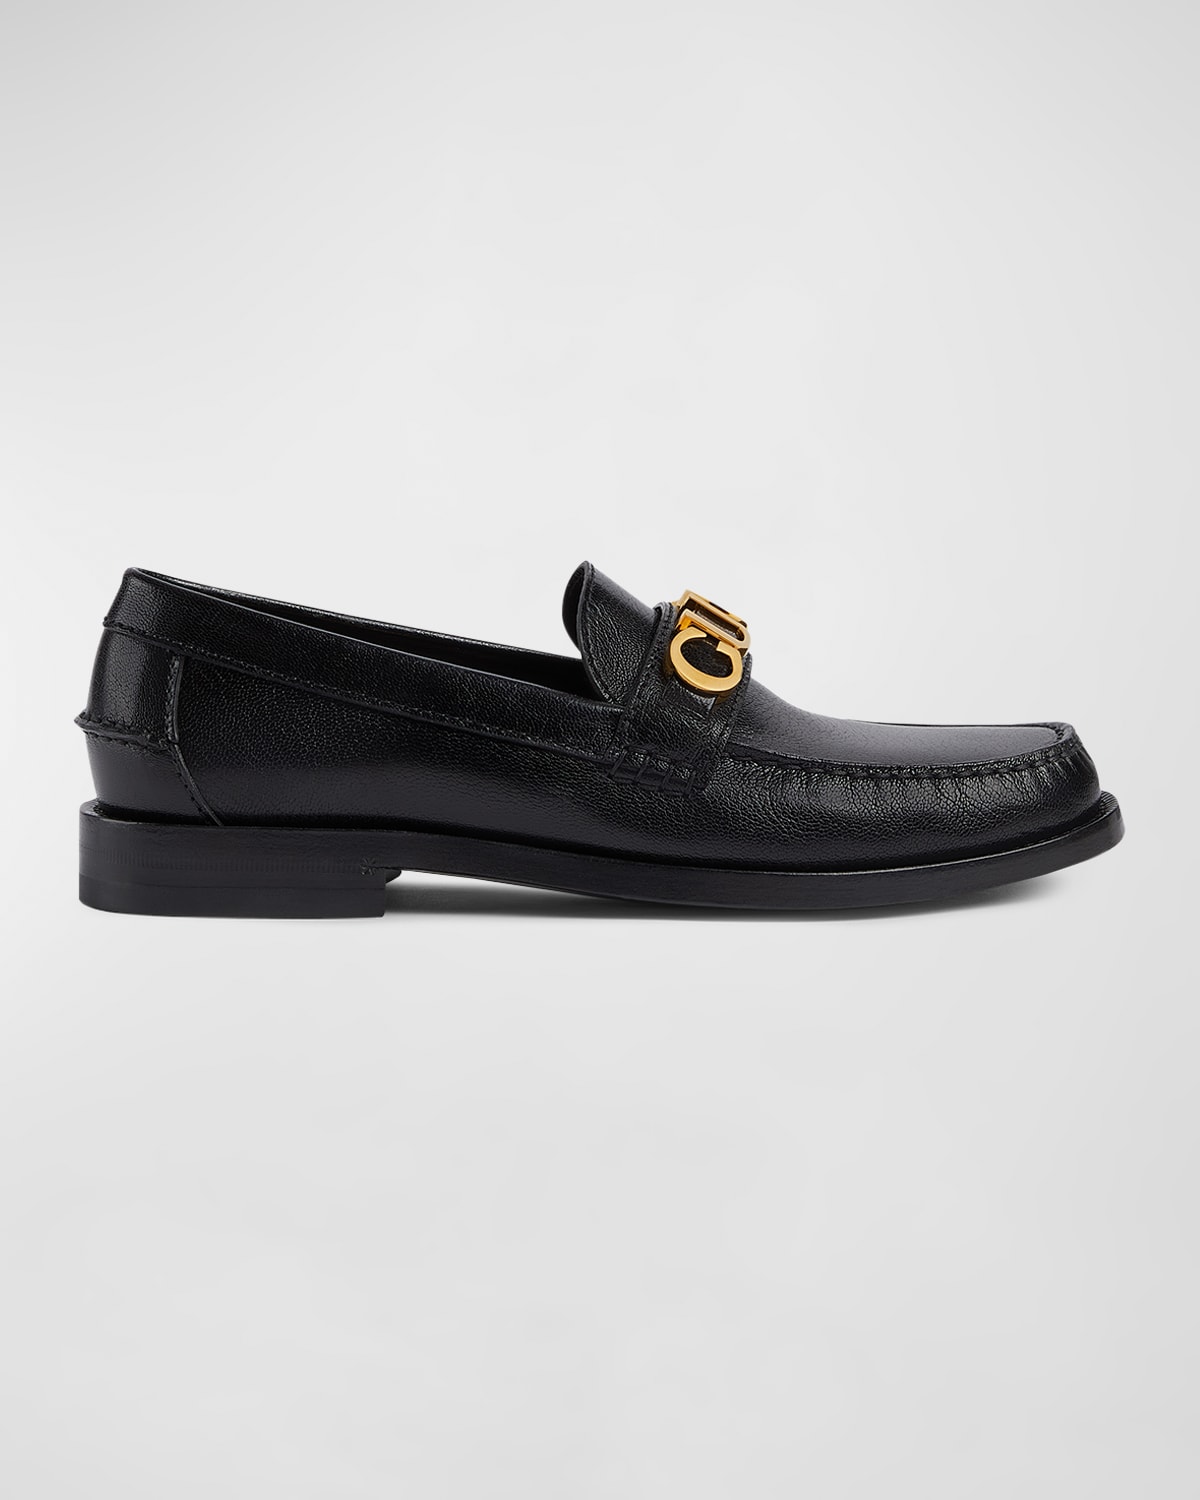 Gucci Cara Classic Logo Moccasin Loafers In Black